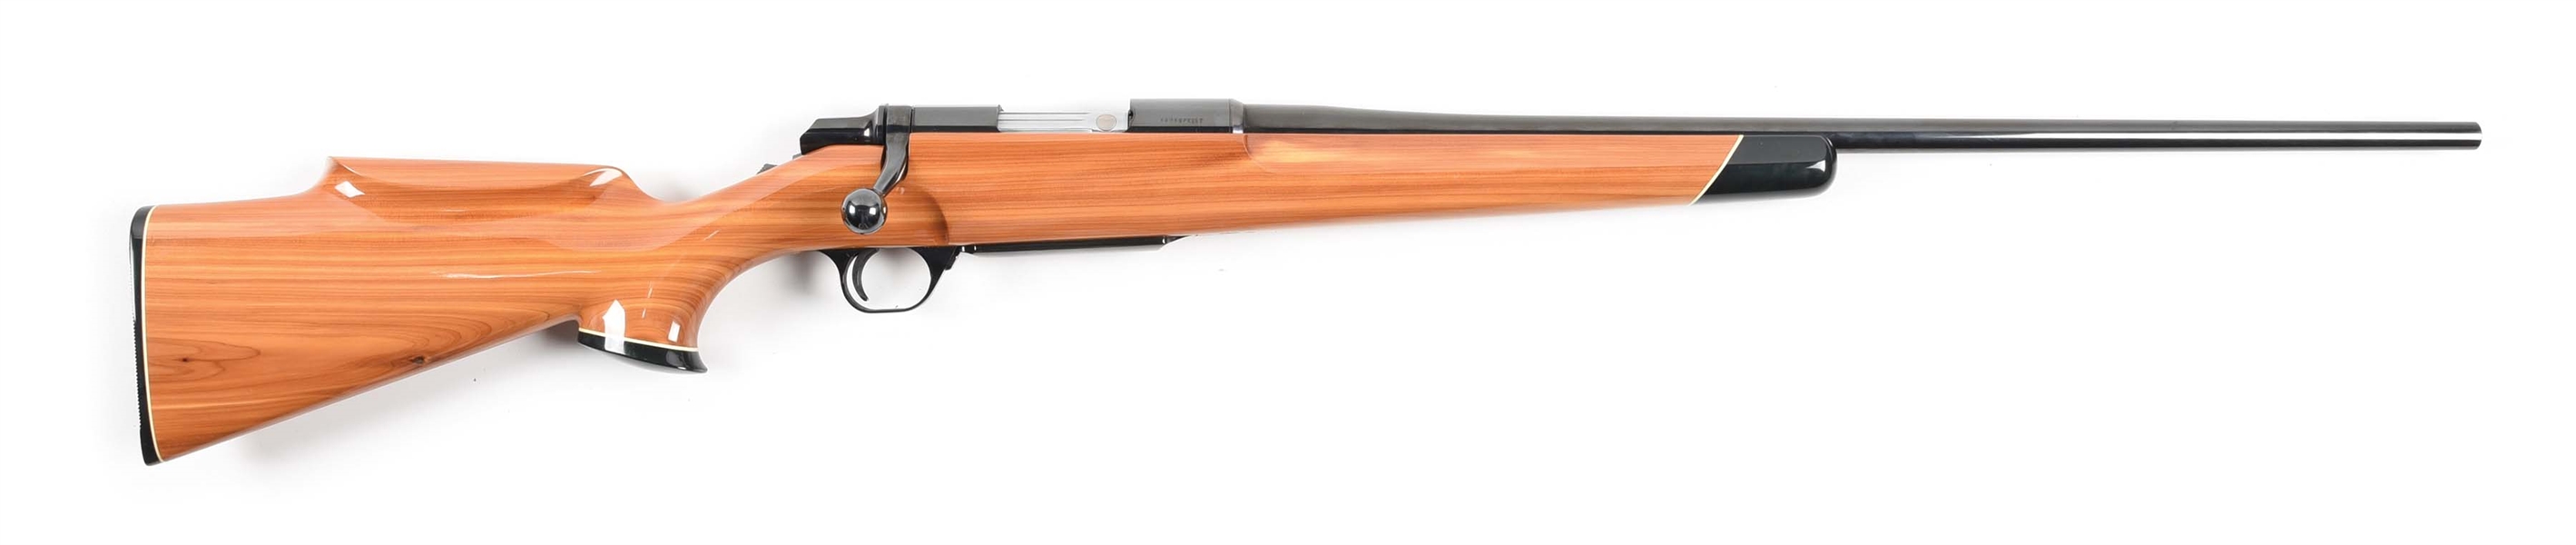 (M) BROWNING BBR BOLT ACTION RIFLE WITH CEDAR STOCK.